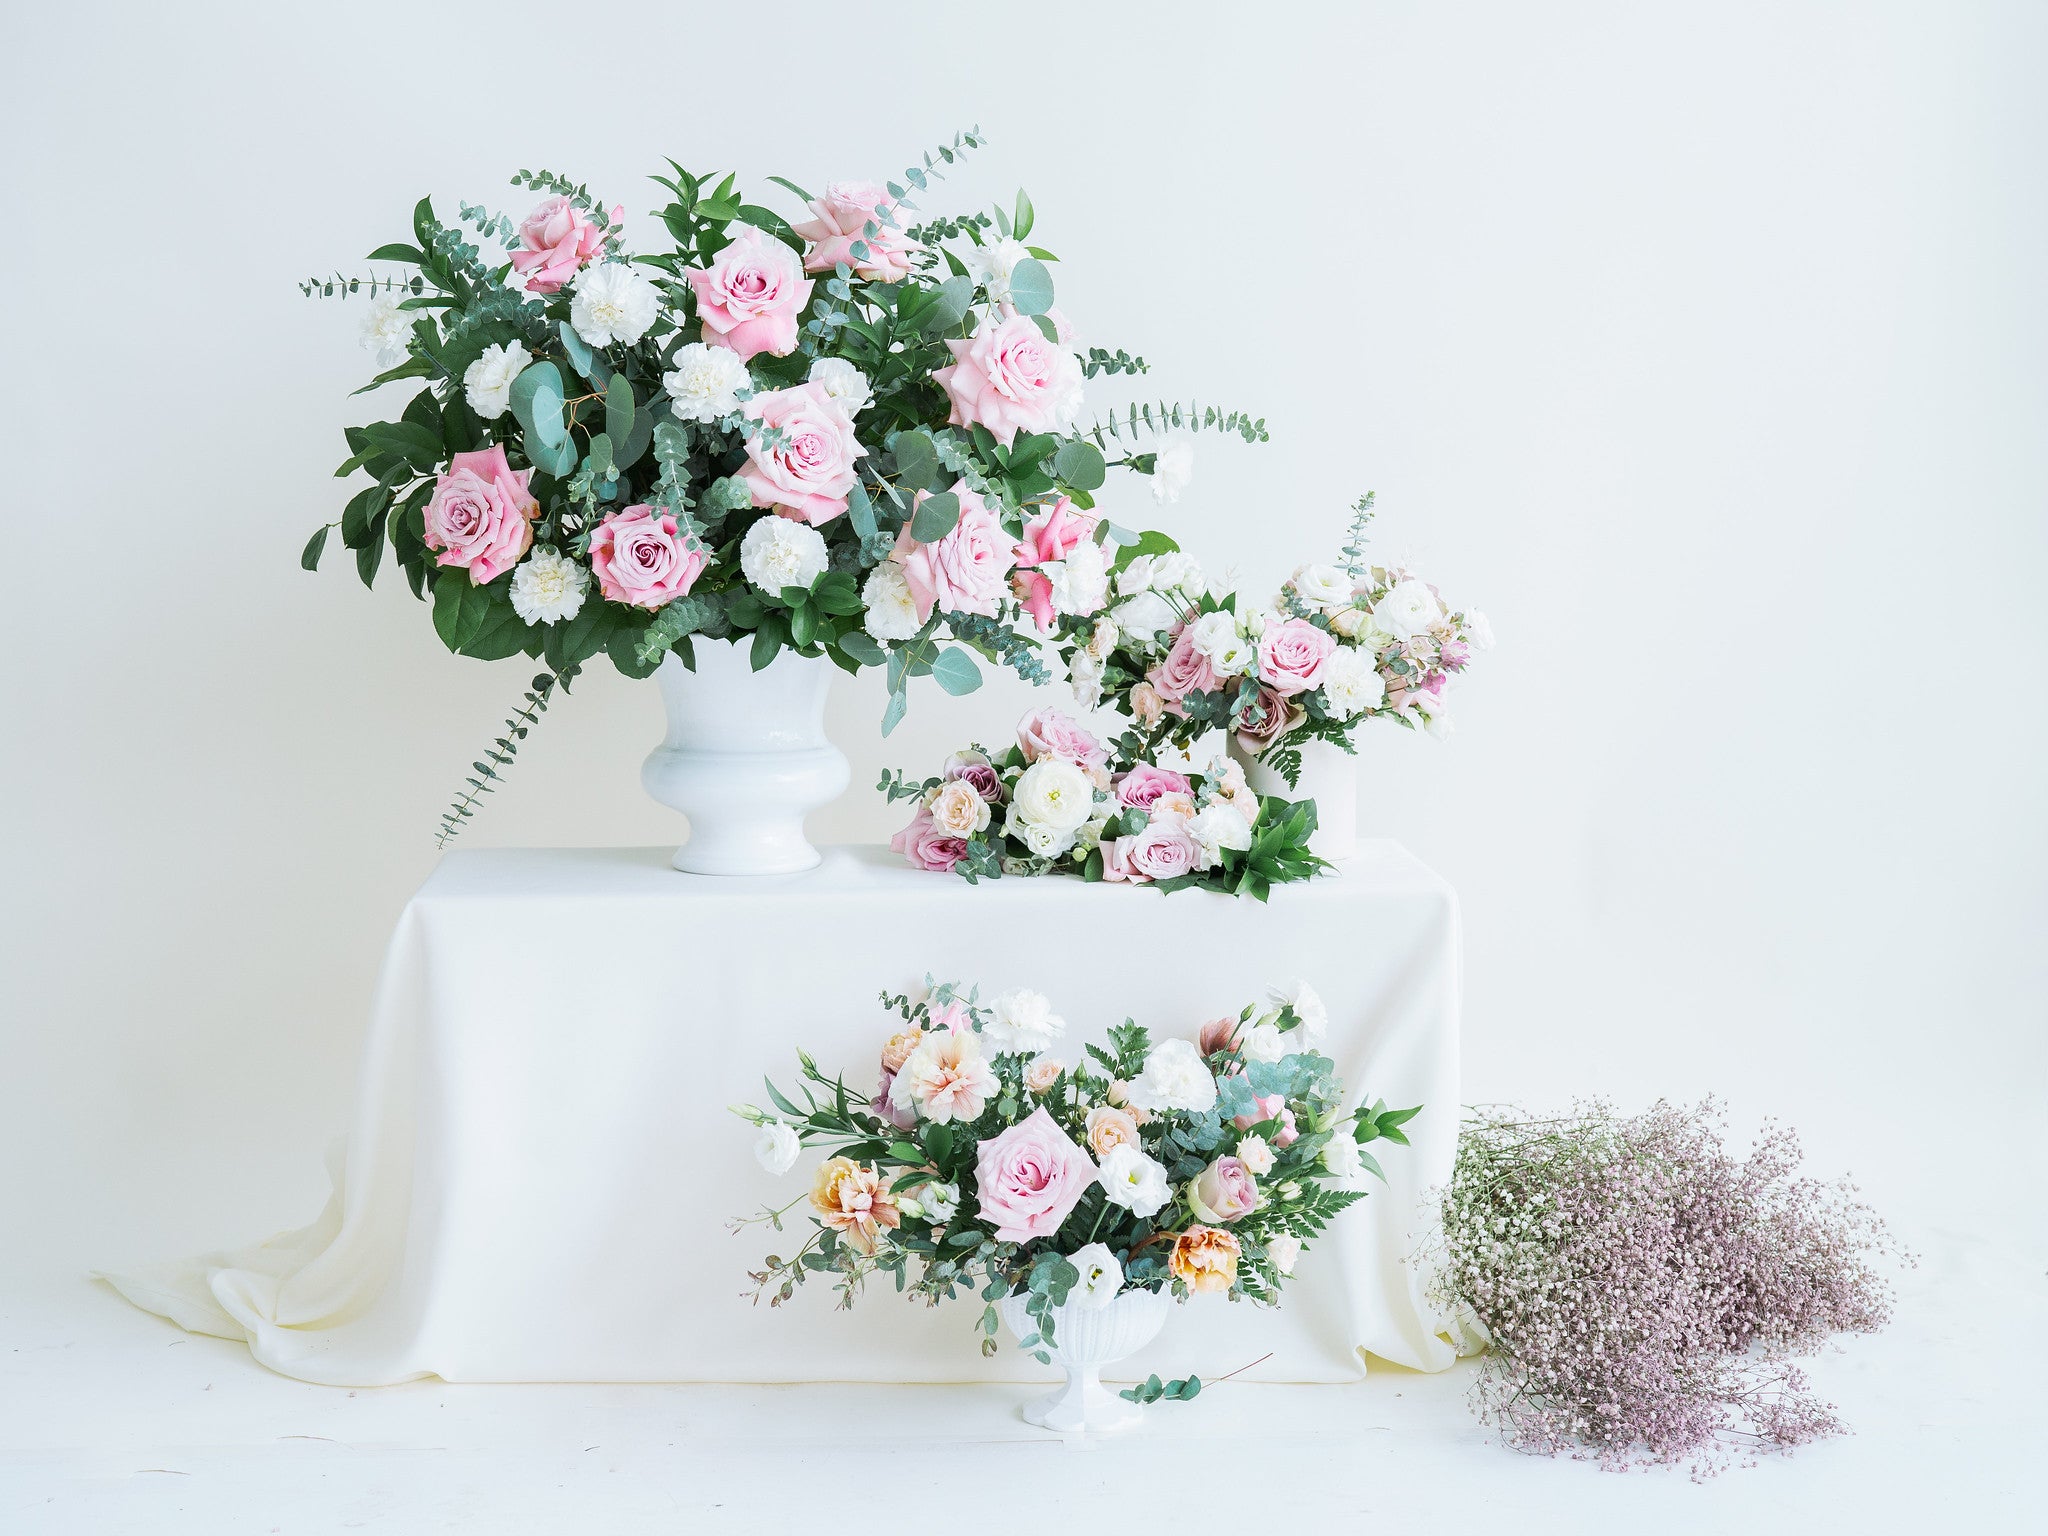 How To Build Large Ceremony Urns